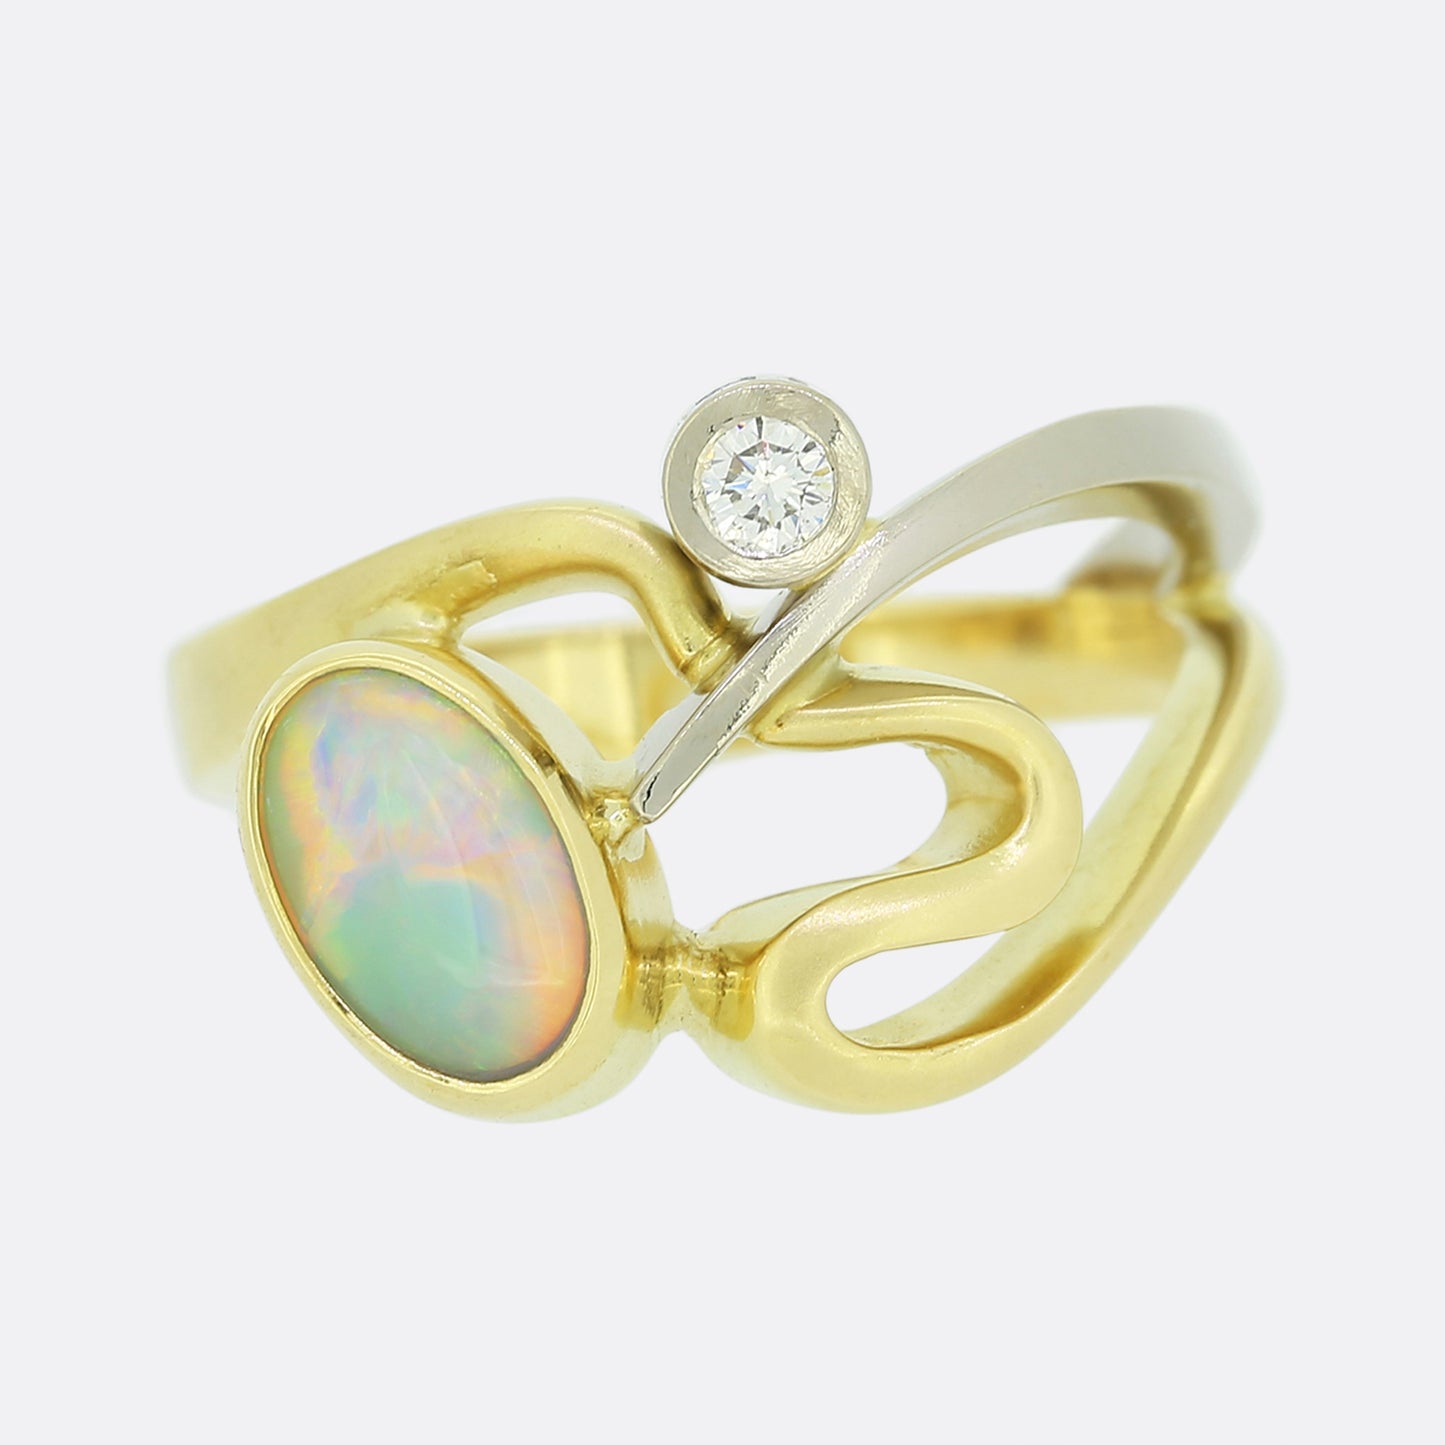 White Opal and Diamond Abstract Ring